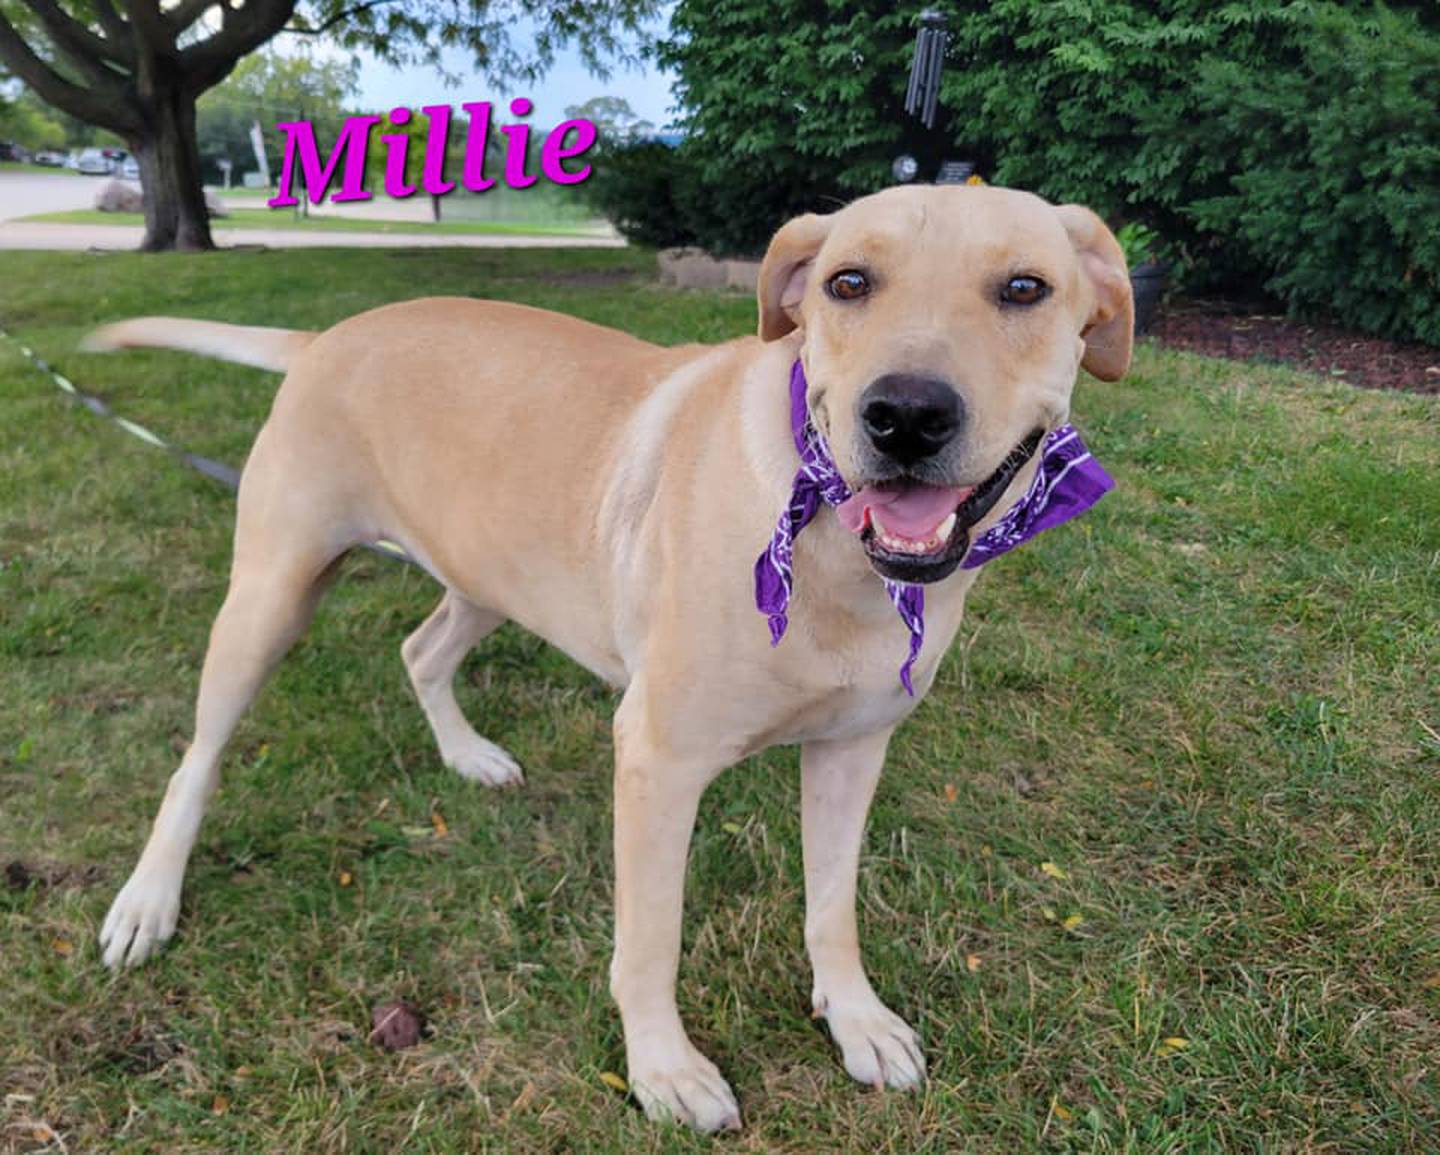 Millie is sweet, happy and loves belly massages.  To meet Millie, contact Hopeful Tails Animal Rescue at hopefultailsadoptions@outlook.com.  Visit hopefultailsanimalrescue.org.